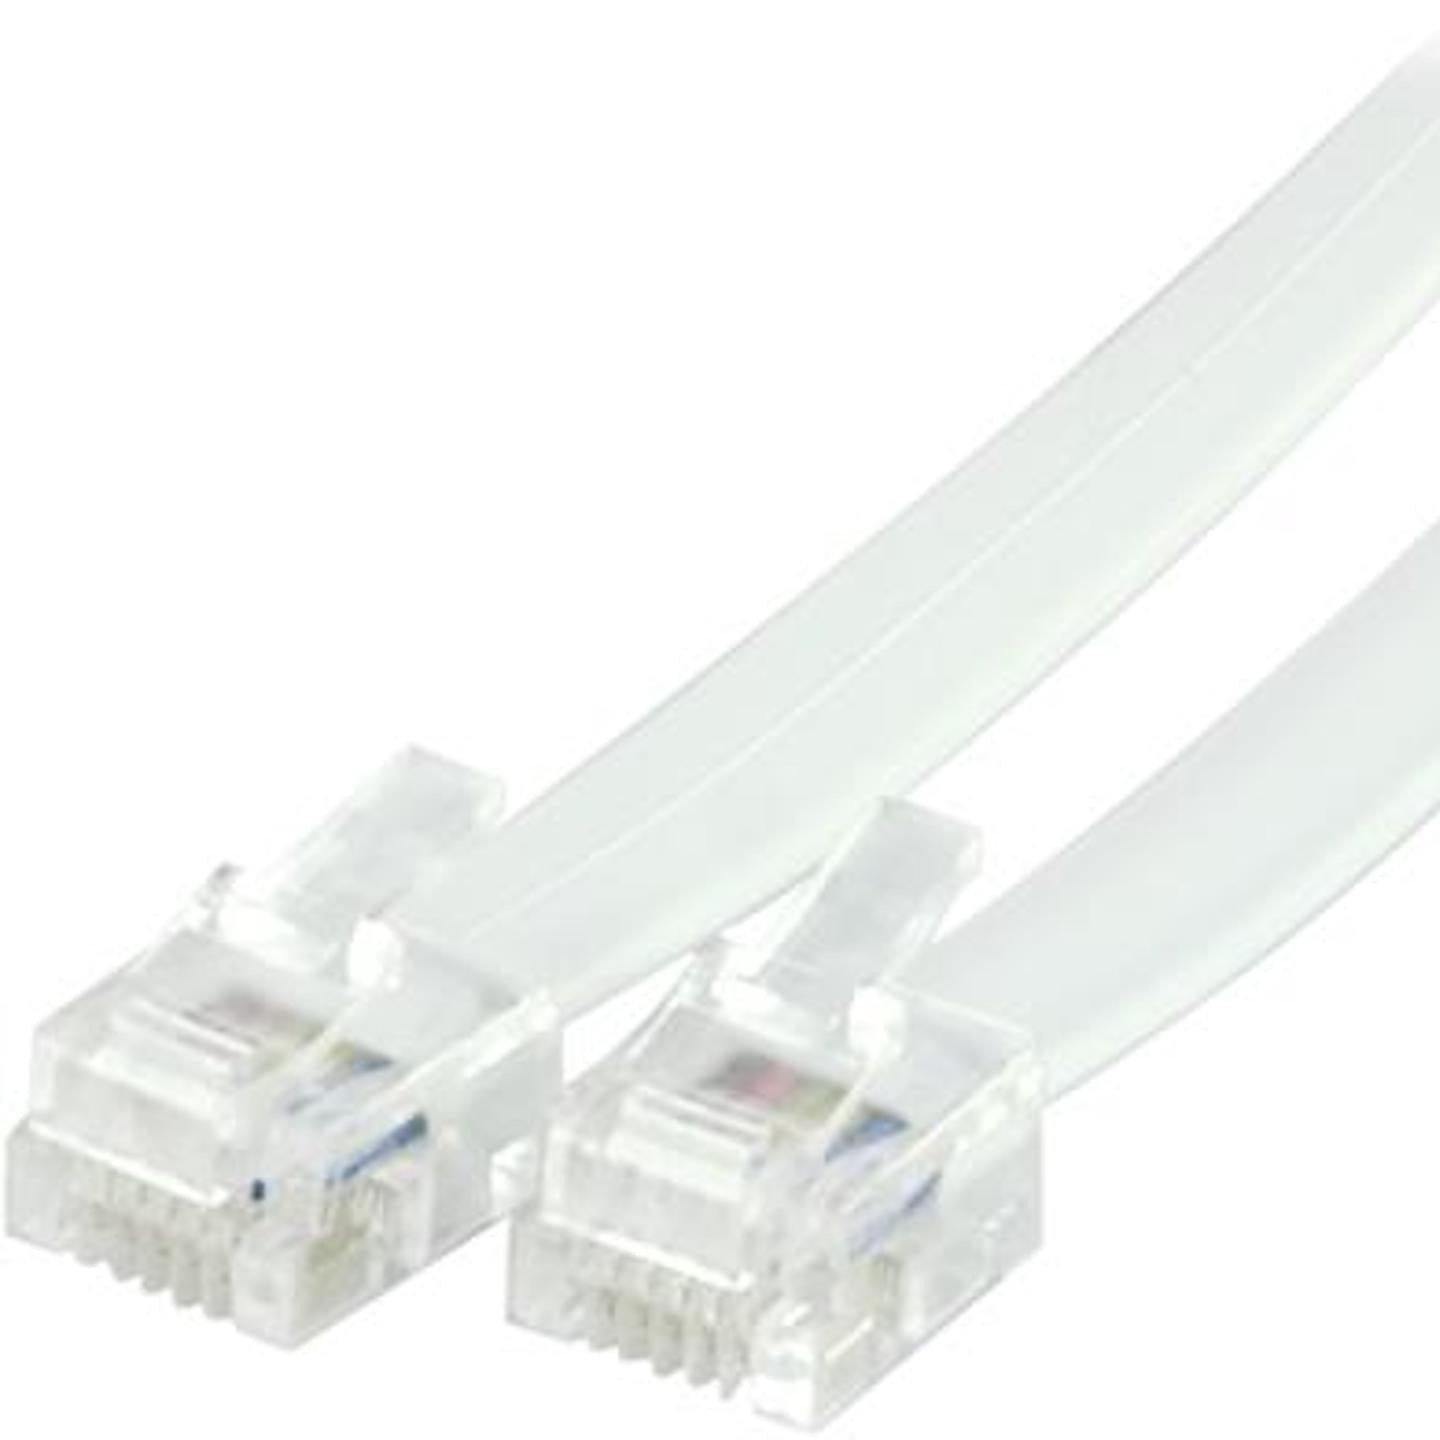 RJ12 cable 3m (note: 1m included in Currently One)